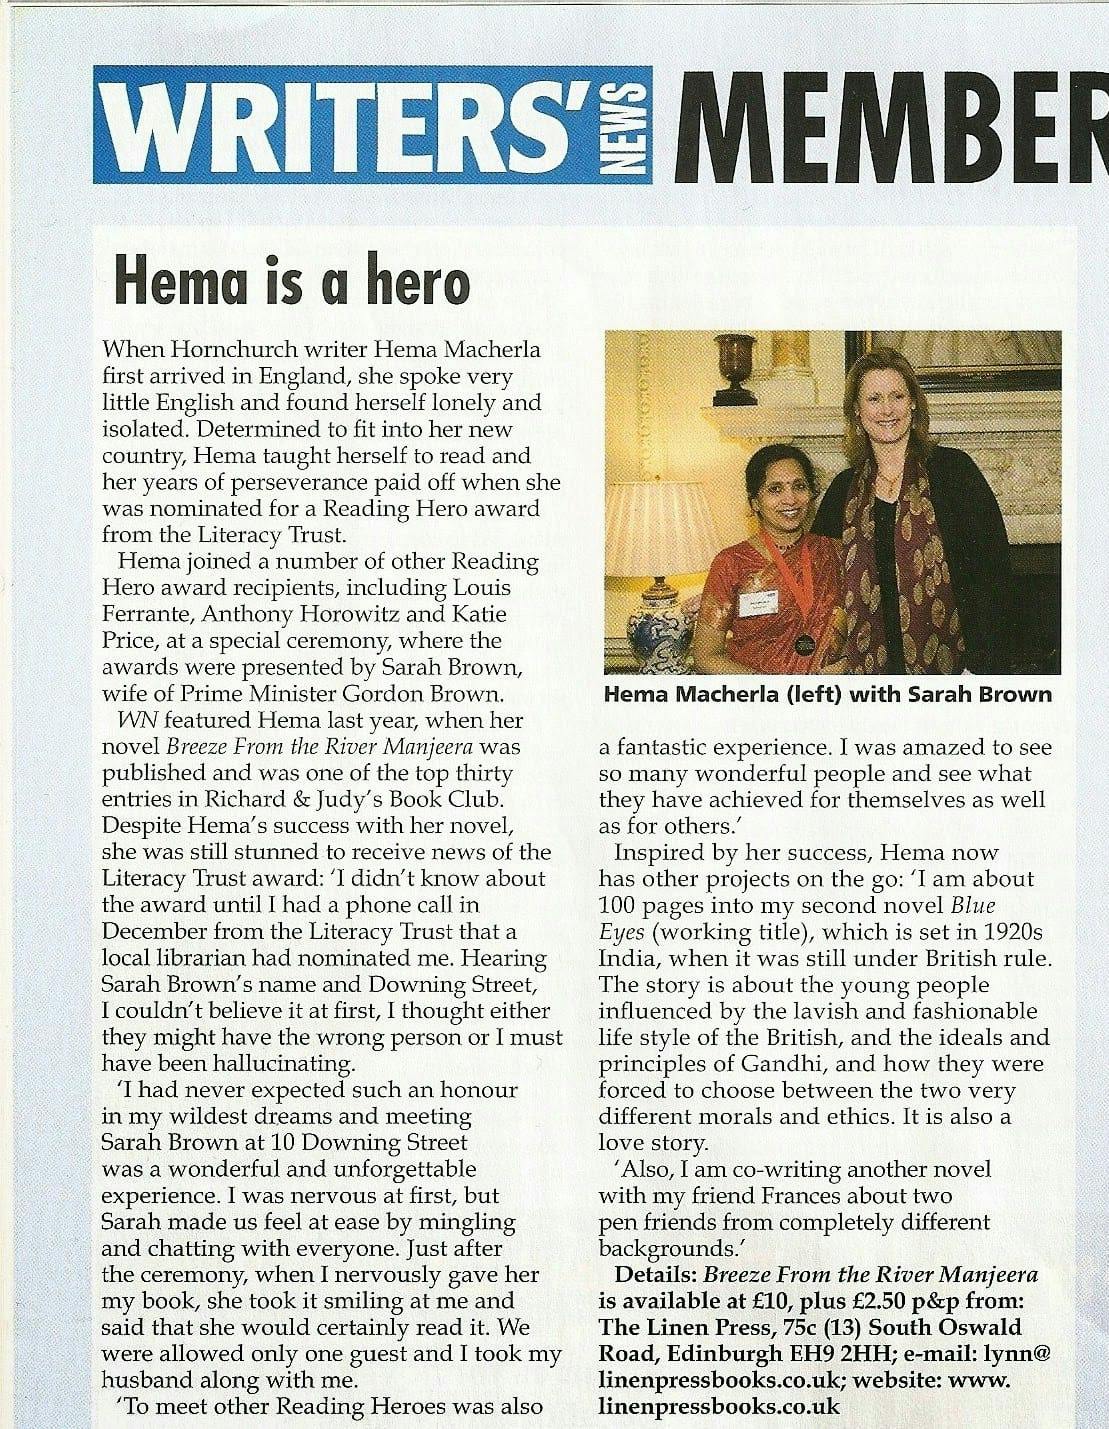 My Reading Hero award featured in the 'Writers' News' magazine 